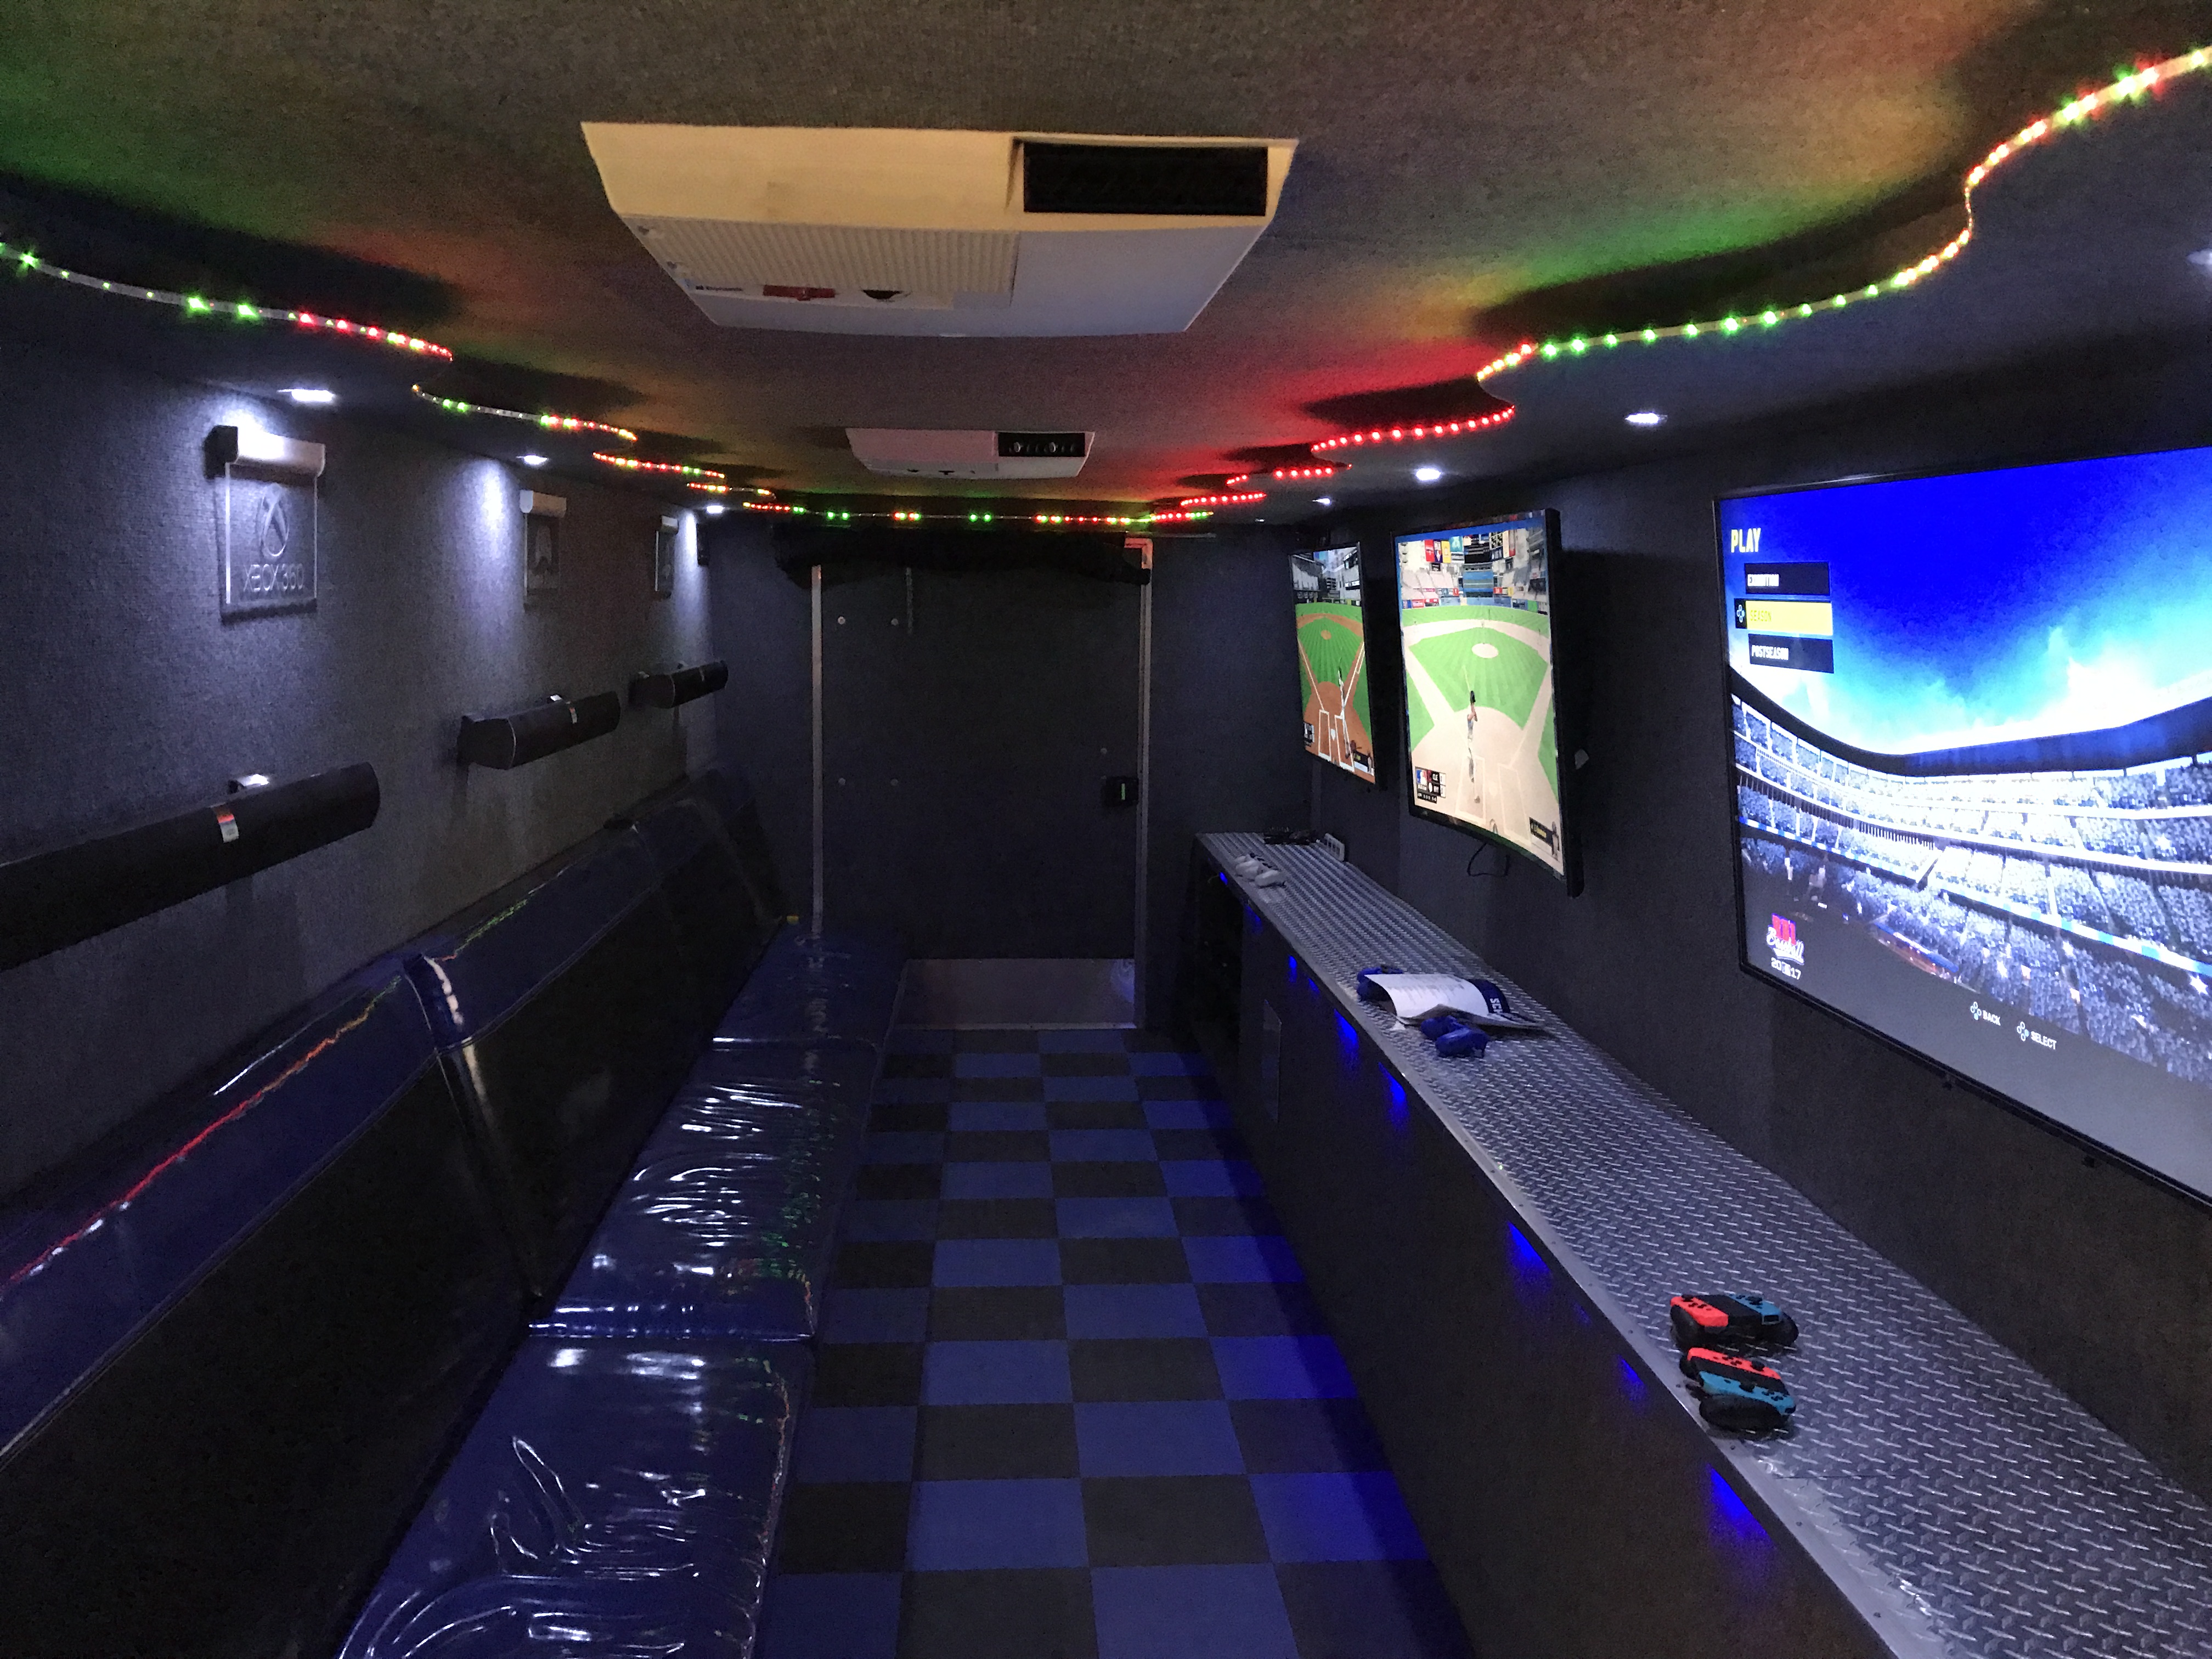 mobile gaming truck